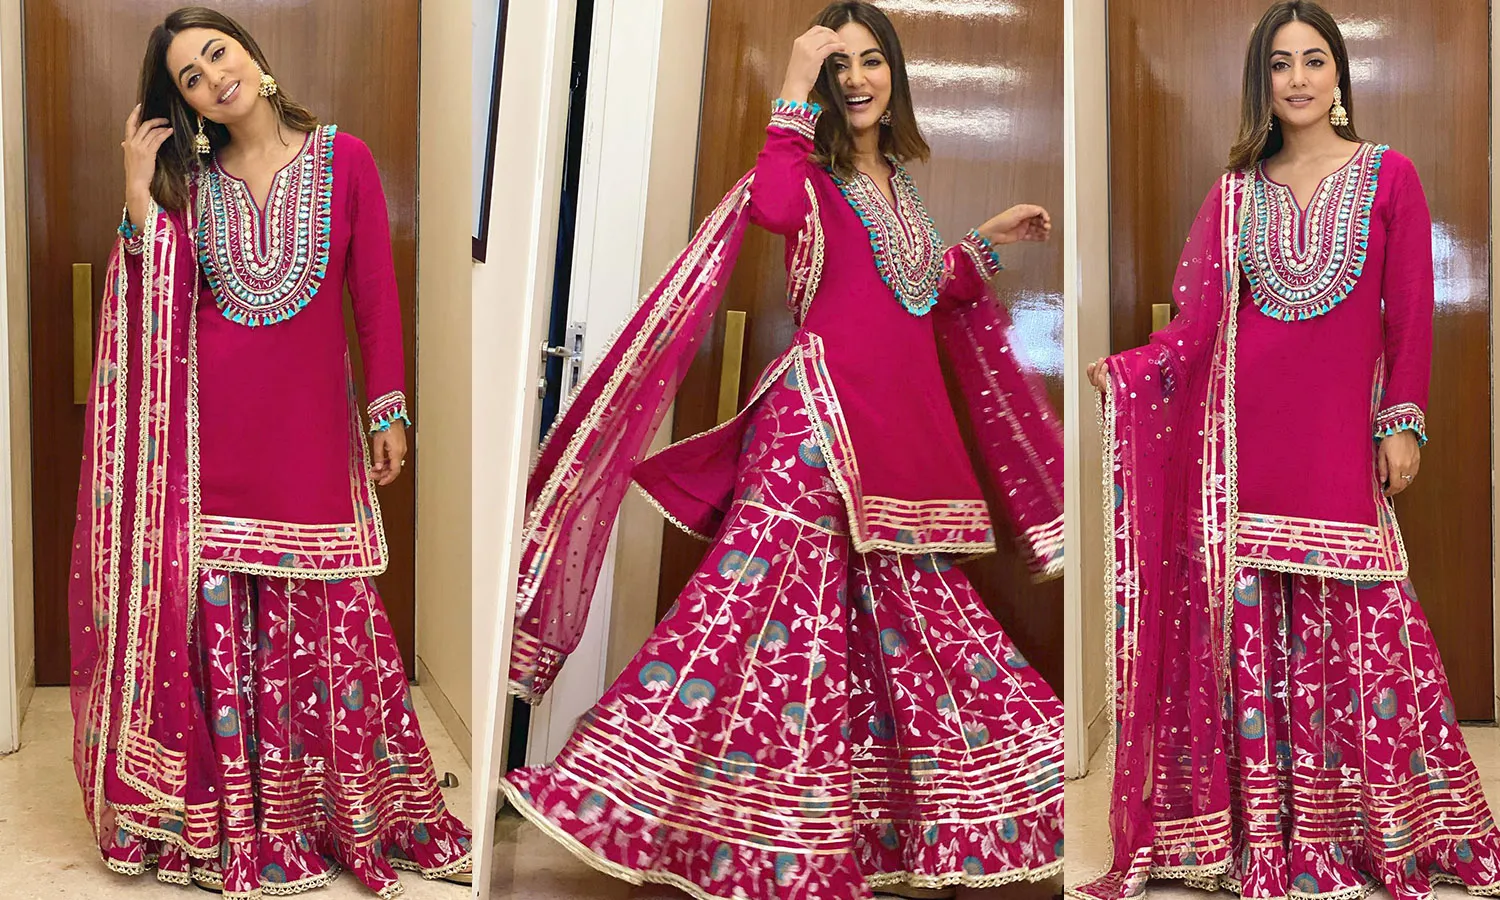 Deck up like Hina Khan looks effortlessly stylish in a pink sharara.